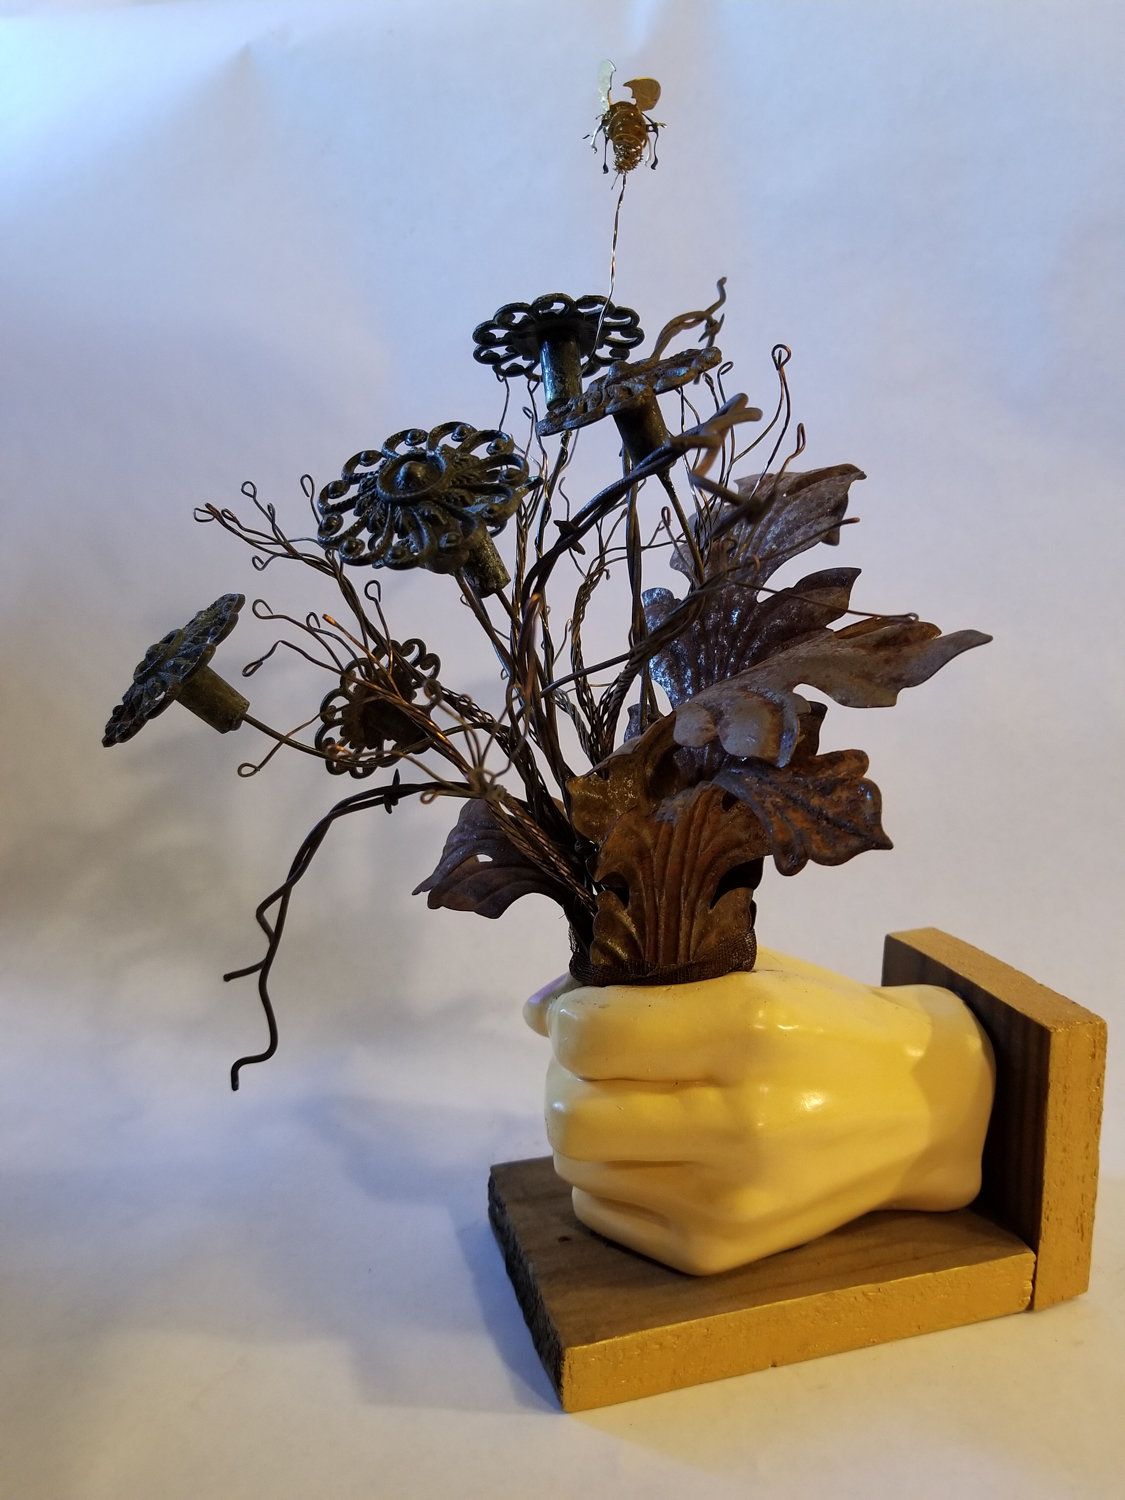 Suzanne Hockstein works with found materials, which are random objects selected to create art, which often includes metals, wood, and other unconventional elements. An exhibition of her work, ‘Ten,' will be on display at An Beal Bocht Cafe throughout February.